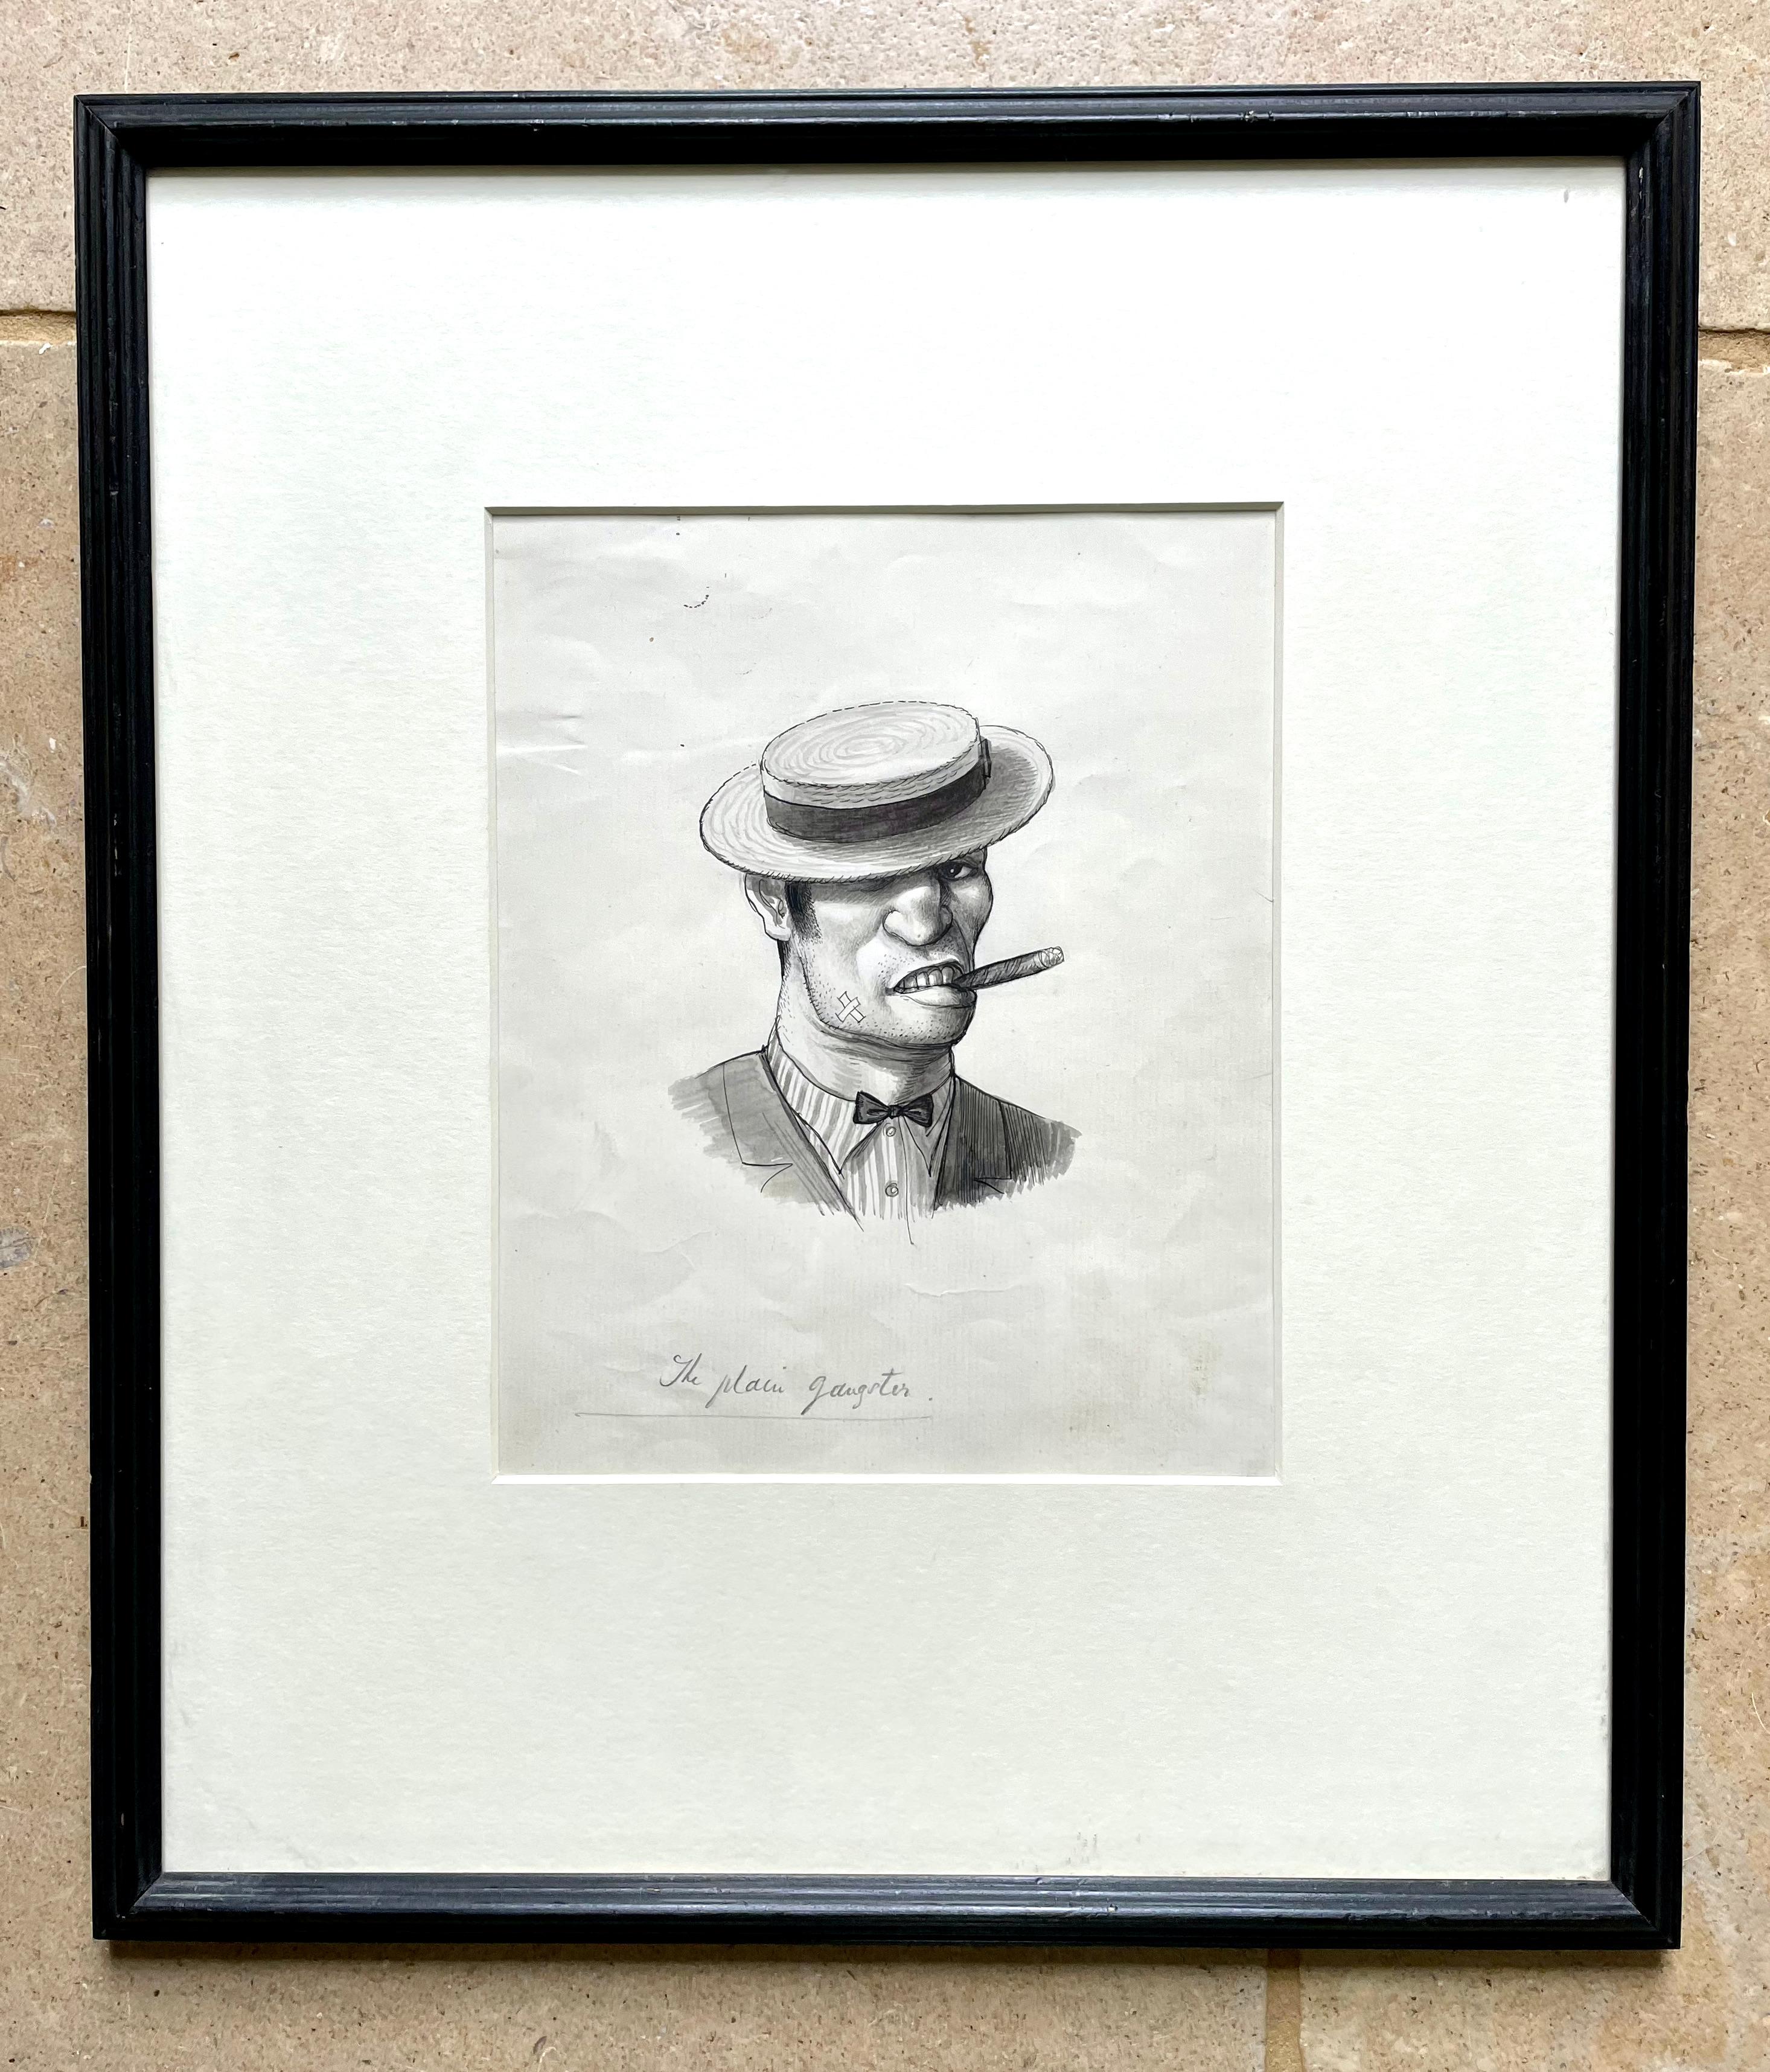 REX JOHN WHISTLER
(British 1905-1944)

The Plain Gangster

Inscribed with title
Pen, brush and ink
Framed

20 by 16.5 cm., 8 by 10 ½ in.
(frame size 39 by 34 cm., 15 ¼ by 13 ¼ in.)

Provenance:
The Shell Mex and BT Advertising Collection;
Sotheby’s,